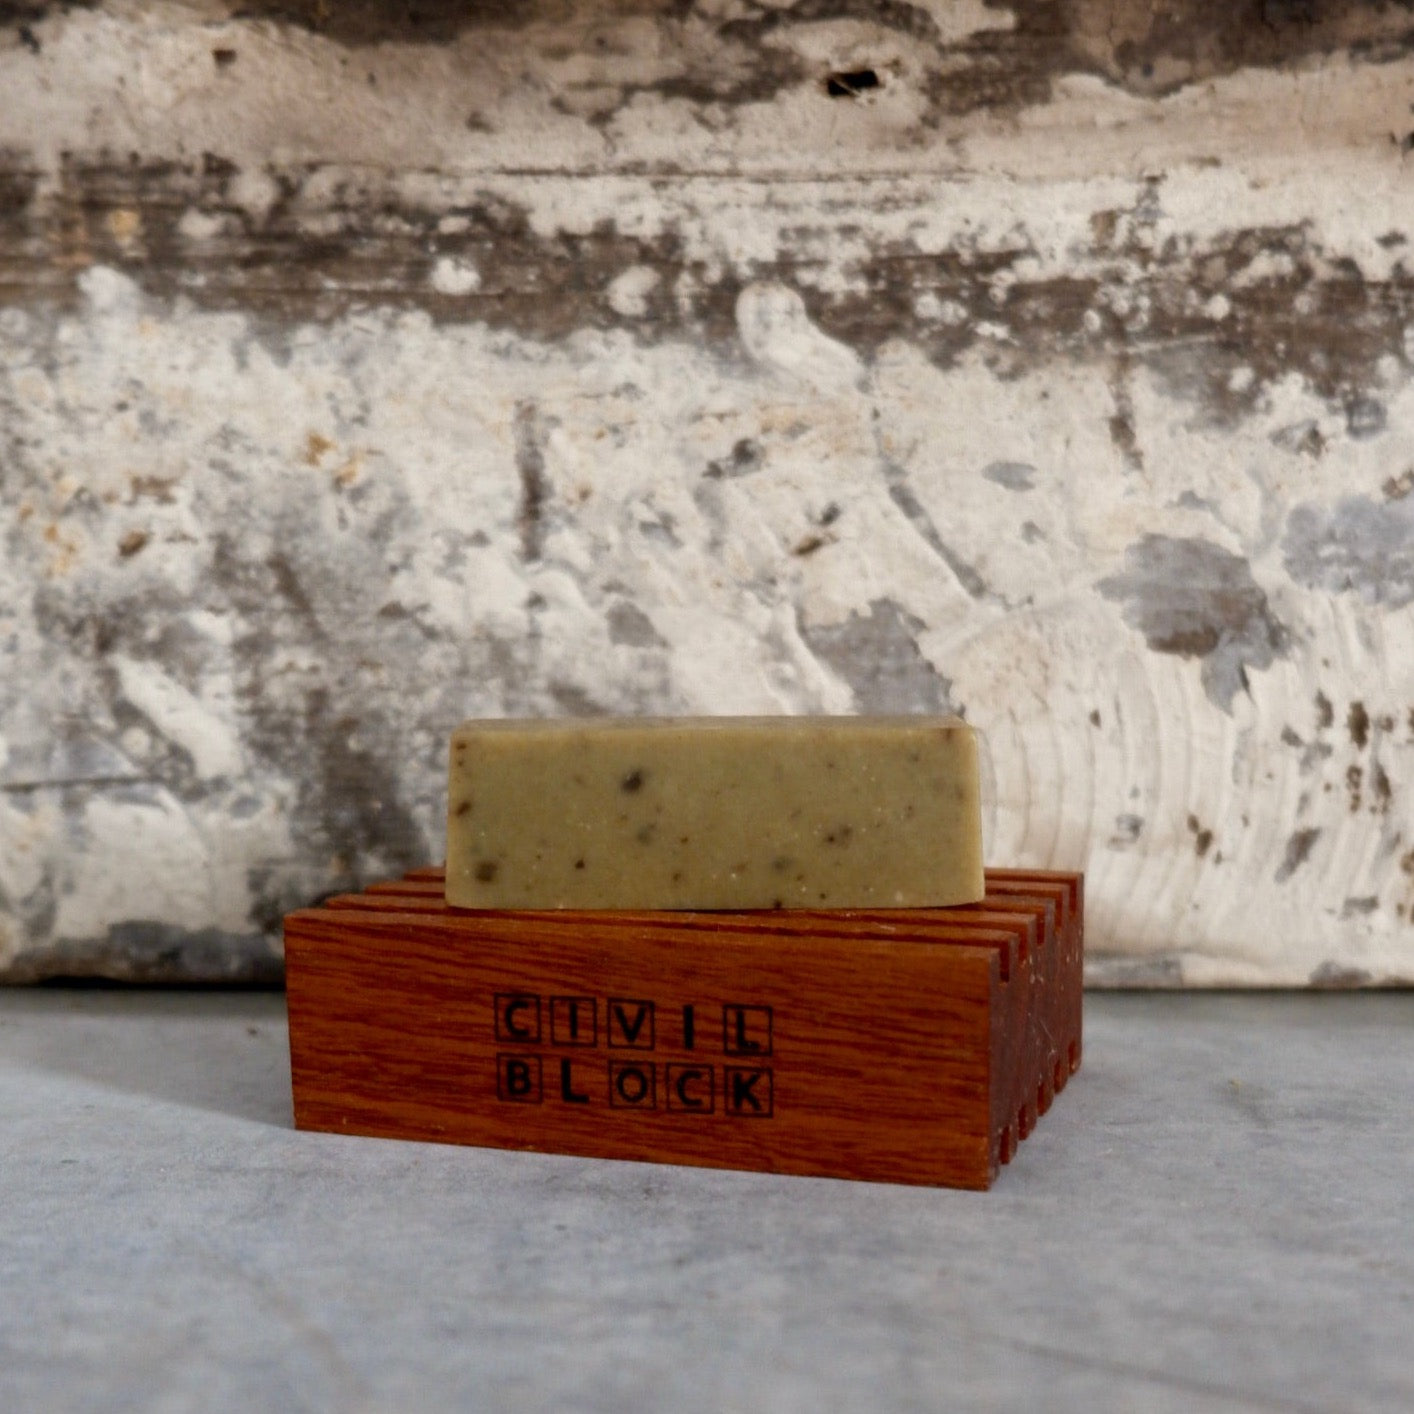 civil block microsoapery natural soap beauty and wellbeing block saver - doubled sided soap dish